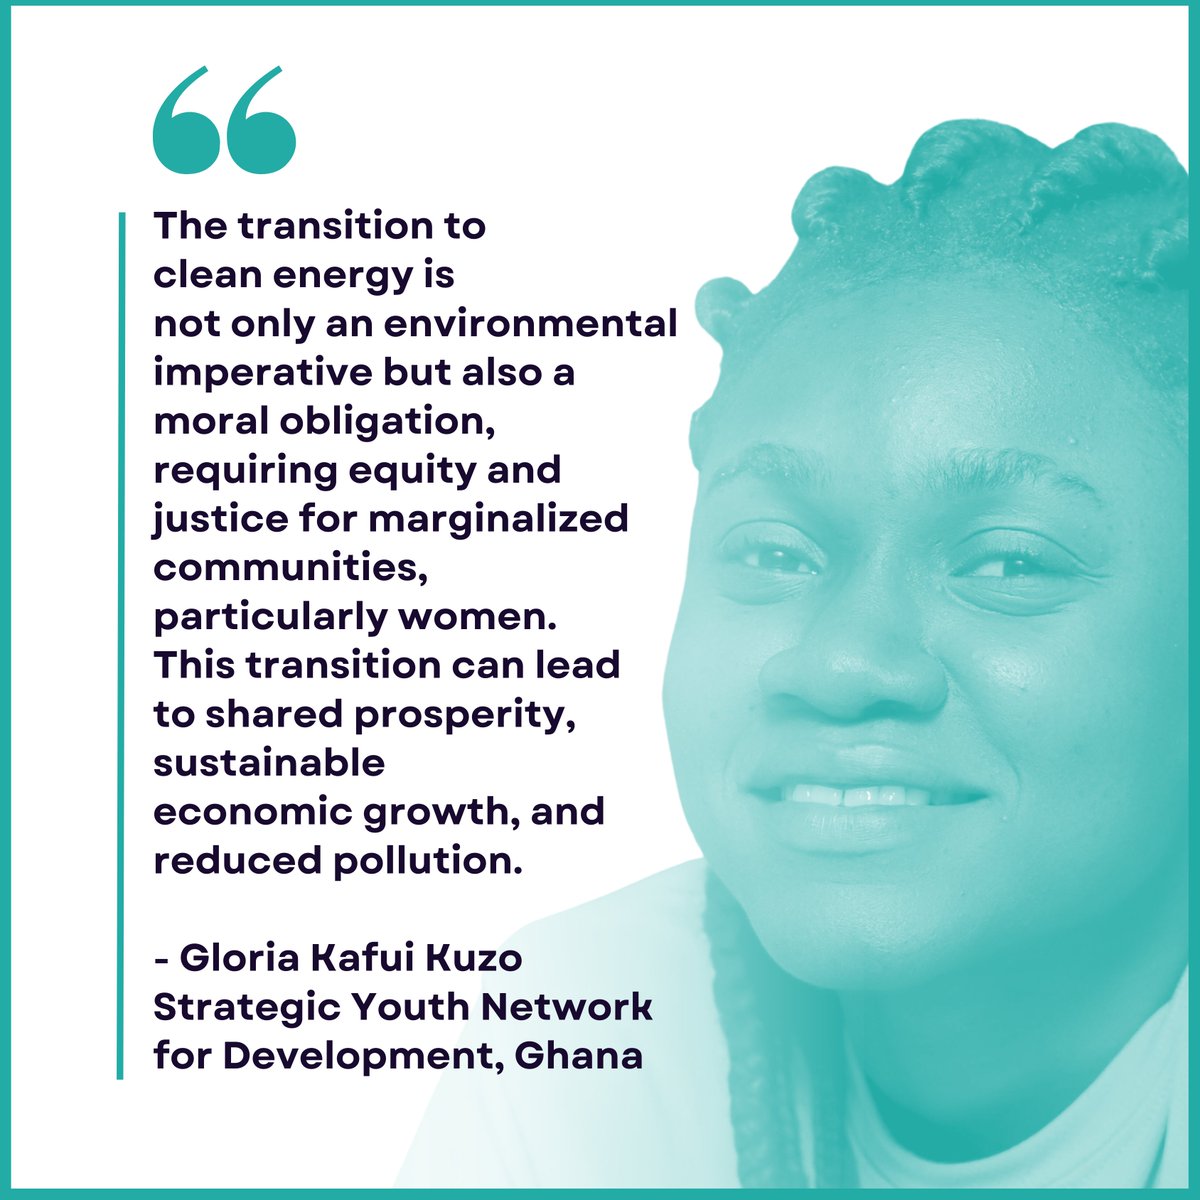 A well thought energy transition plan will be a big win to marginalized, especially women. Gloria, who works with women on the frontline in Ghana shares her thoughts leading up to the @AfDB_Group AGM next week #AFDBAM2024 #AFDBstopfundingfossilfuels #AFDBbankingonrenewables